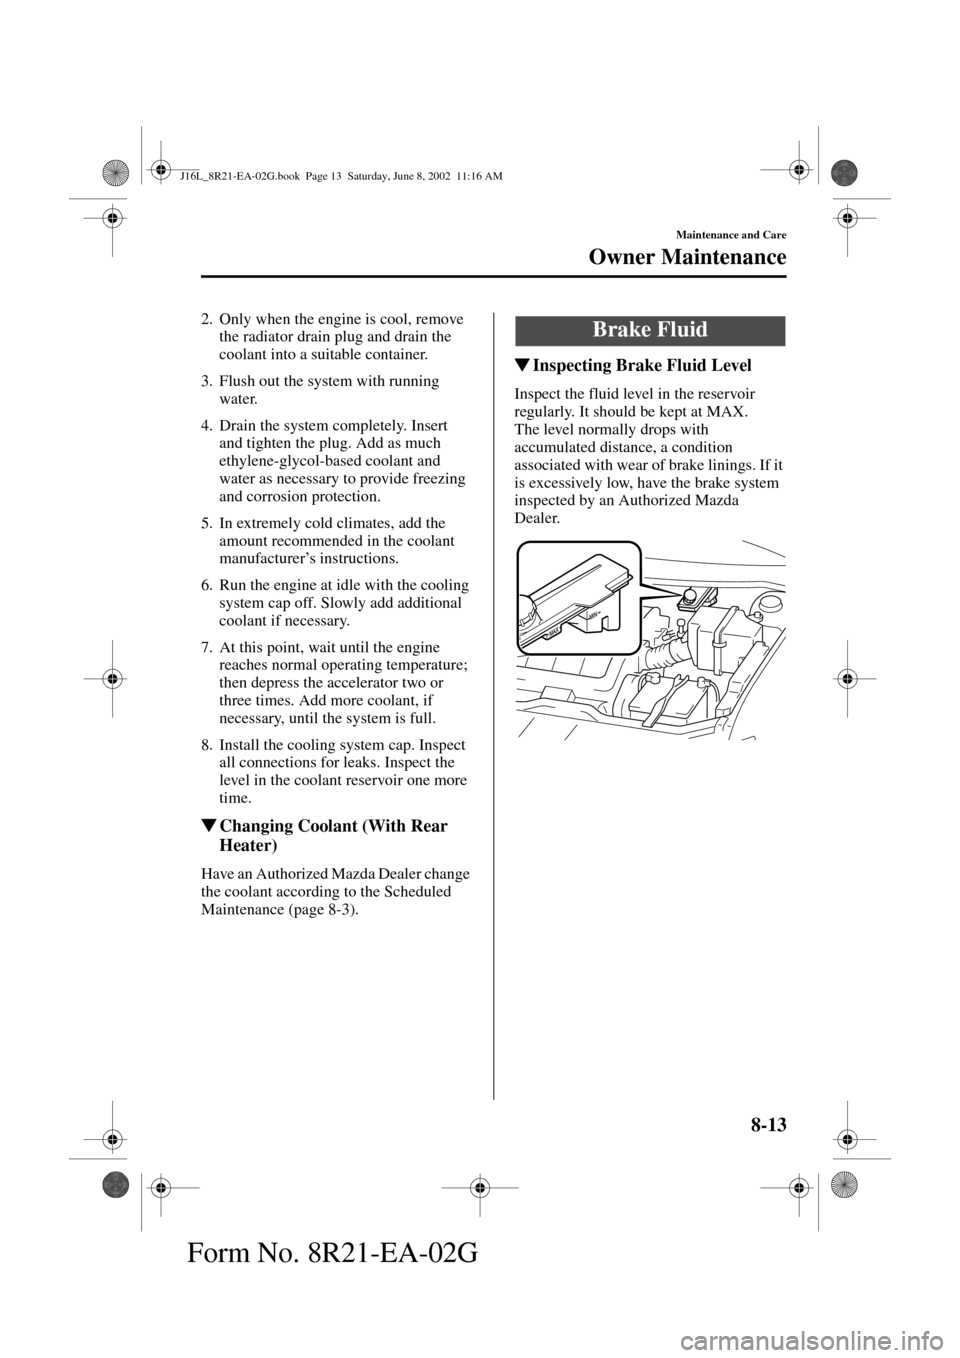 MAZDA MODEL MPV 2003  Owners Manual (in English) 8-13
Maintenance and Care
Owner Maintenance
Form No. 8R21-EA-02G
2. Only when the engine is cool, remove 
the radiator drain plug and drain the 
coolant into a suitable container.
3. Flush out the sys